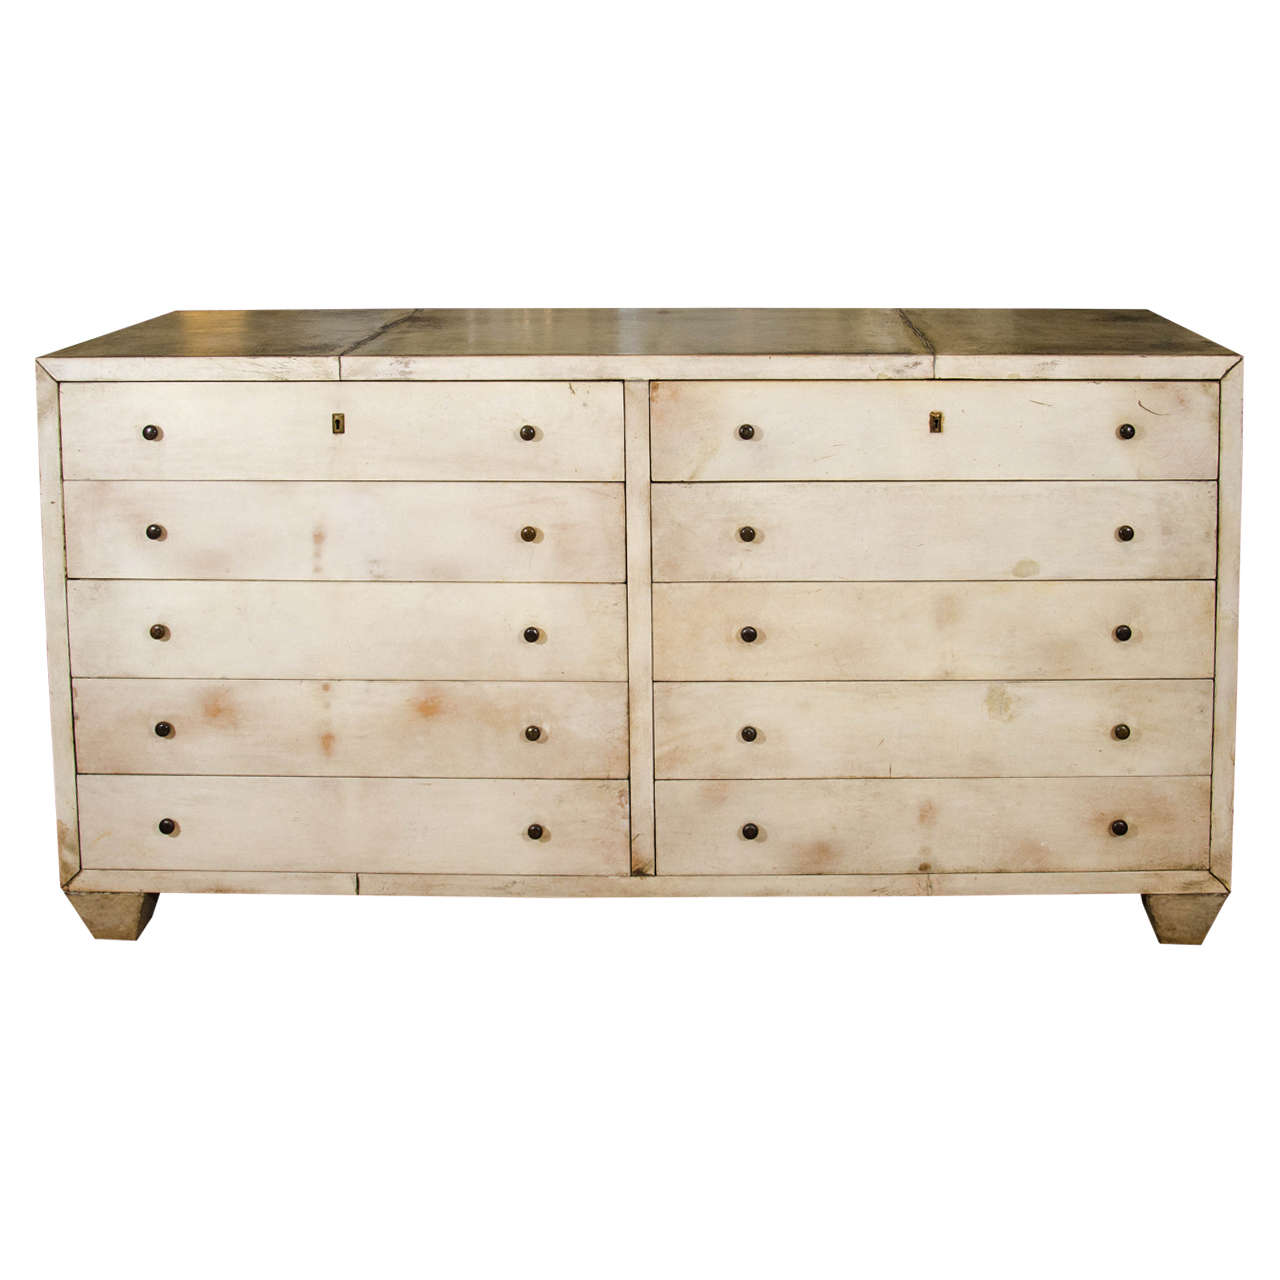 A Period 1950s Jacques Adnet Style Vellum Chest of Drawers For Sale